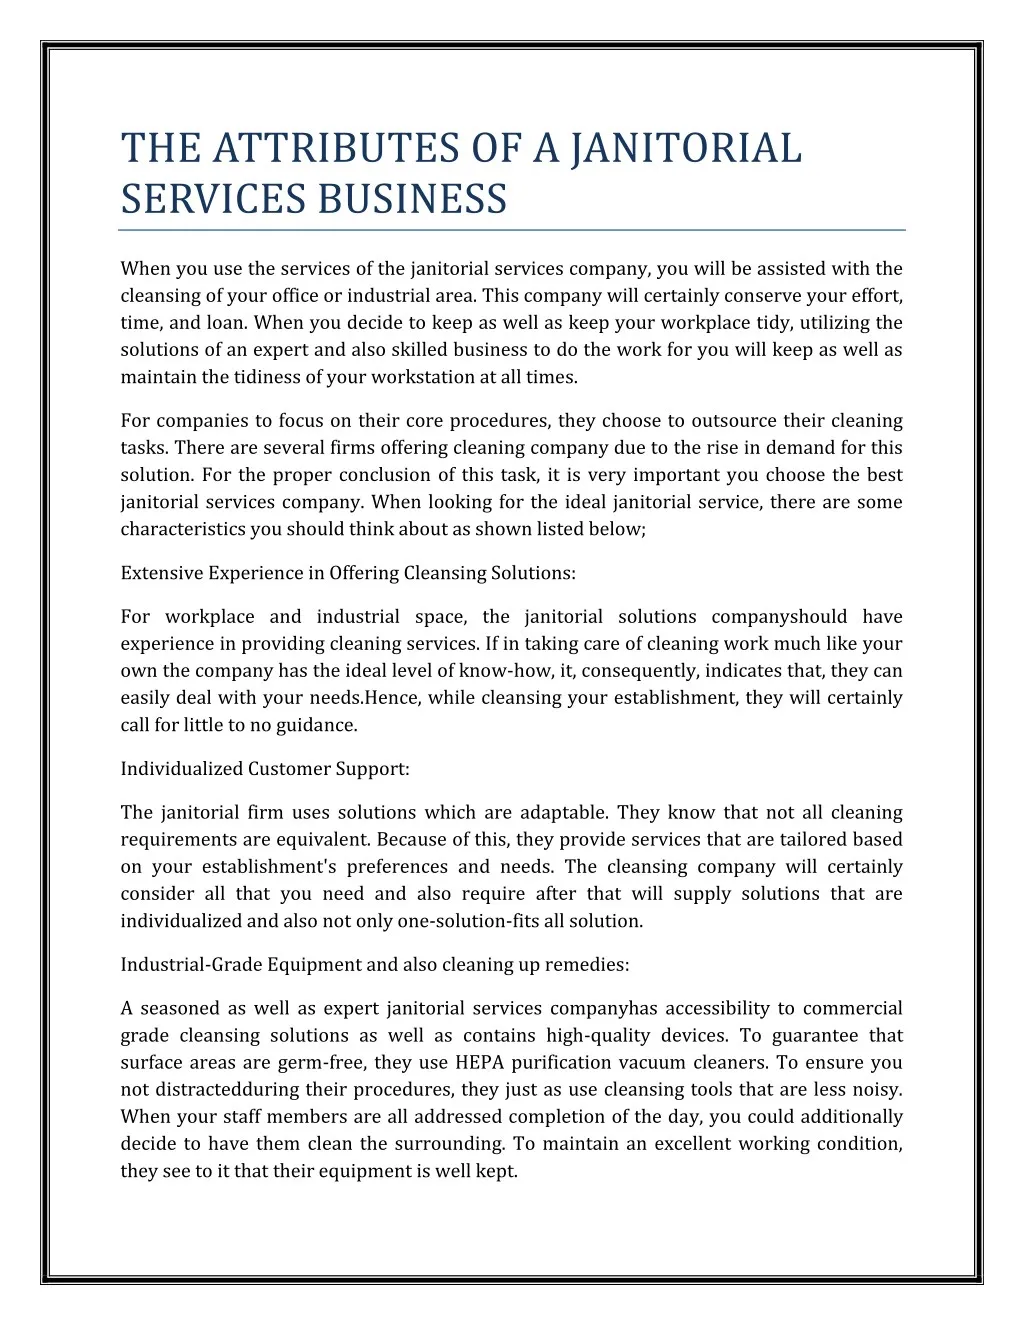 the attributes of a janitorial services business